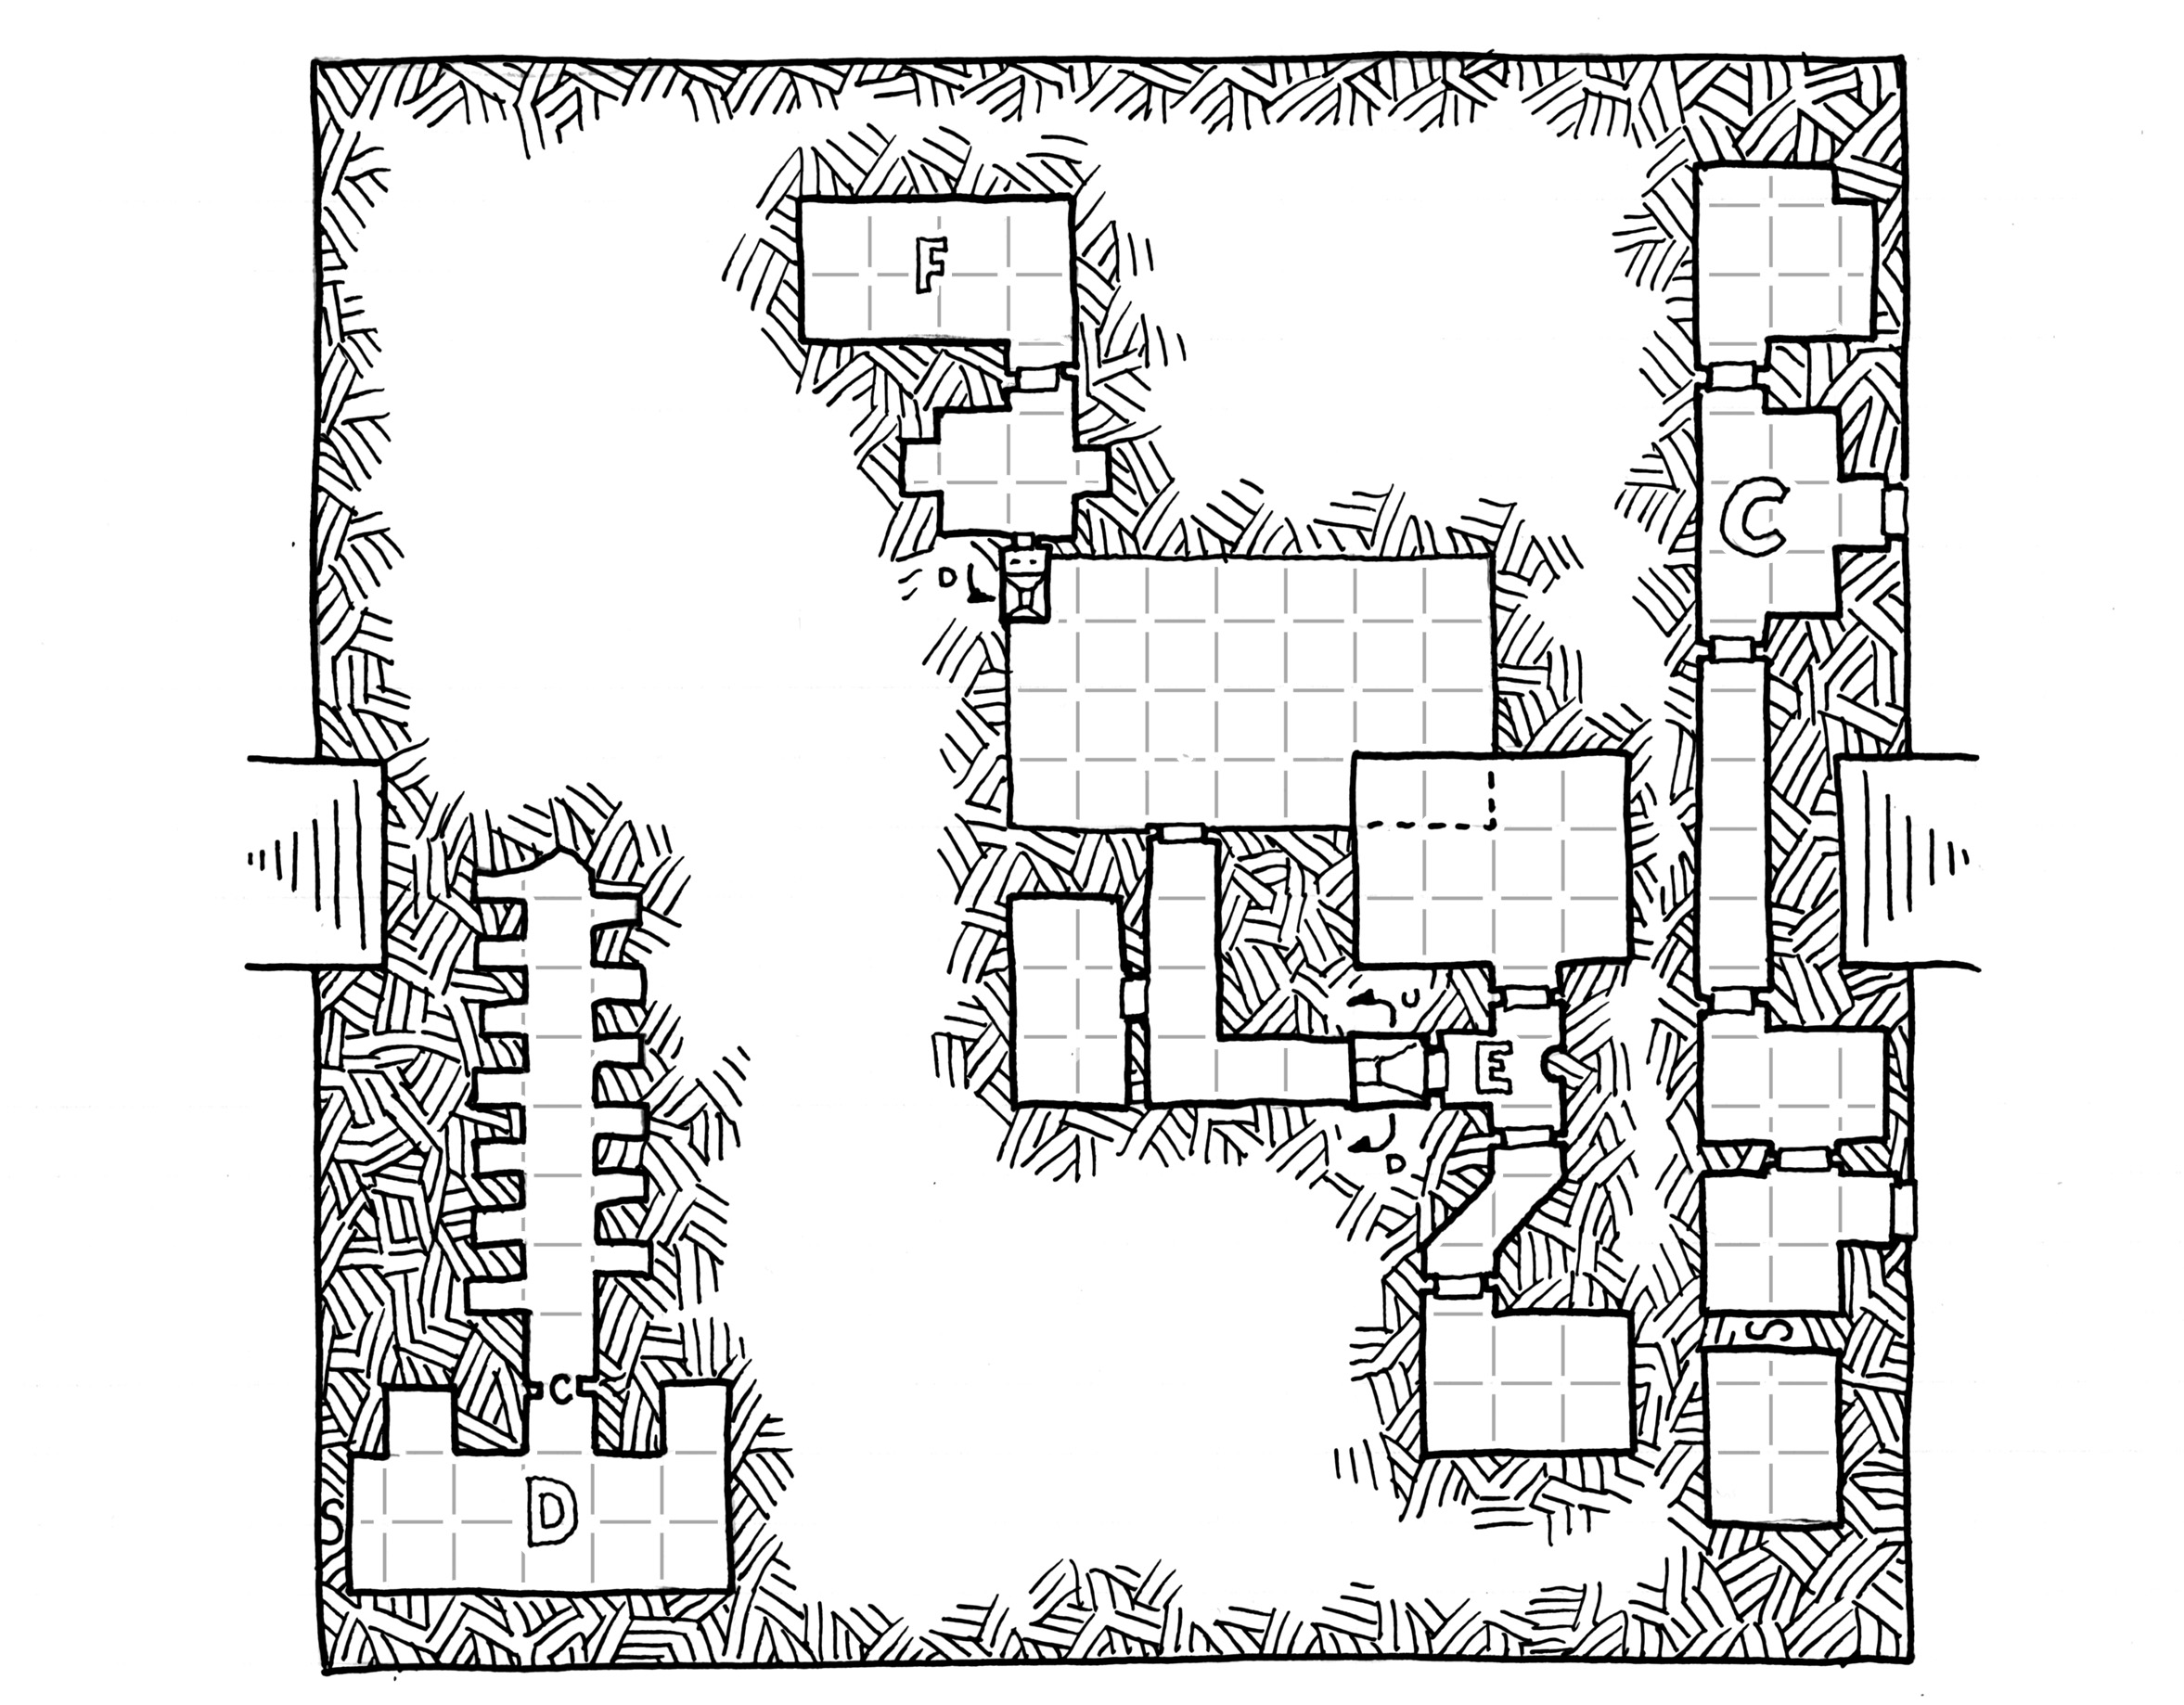 Yekile's Lair map, gridded